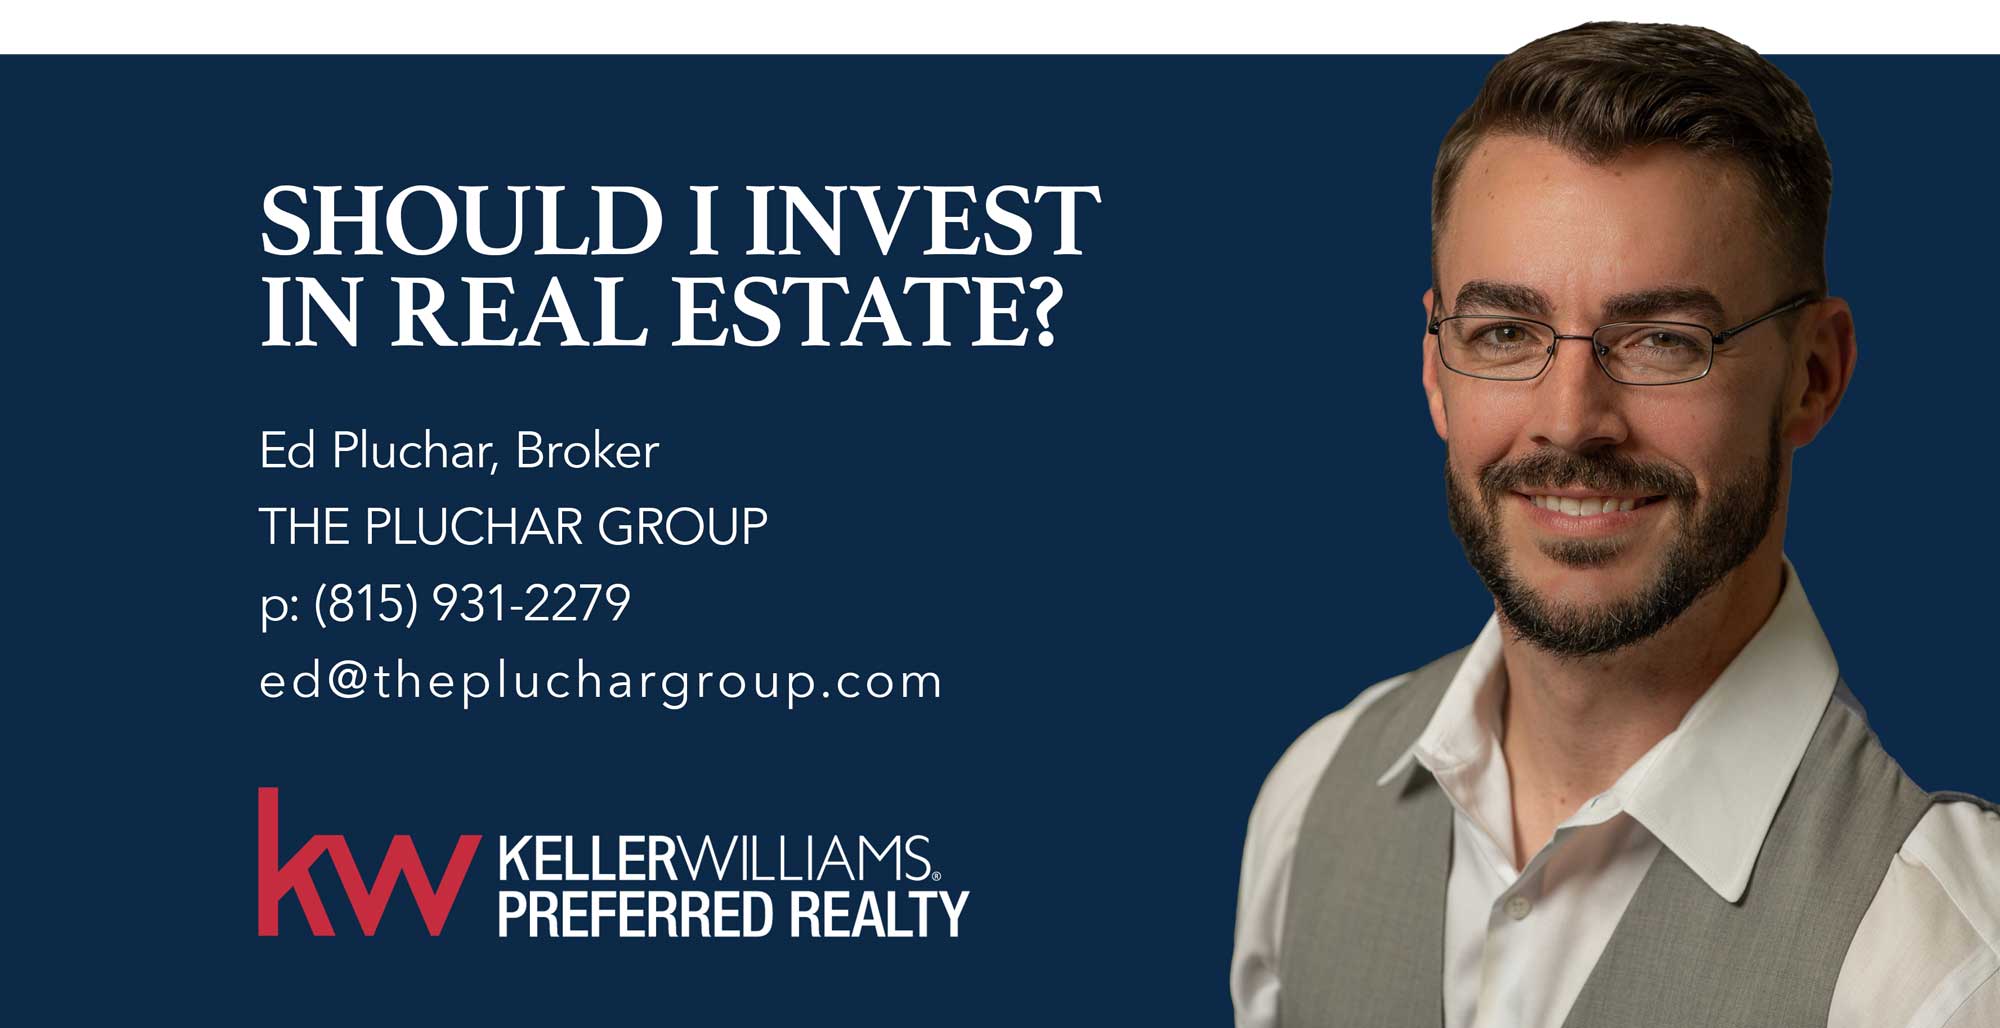 Should I invest in real estate article by The Pluchar Group Realty